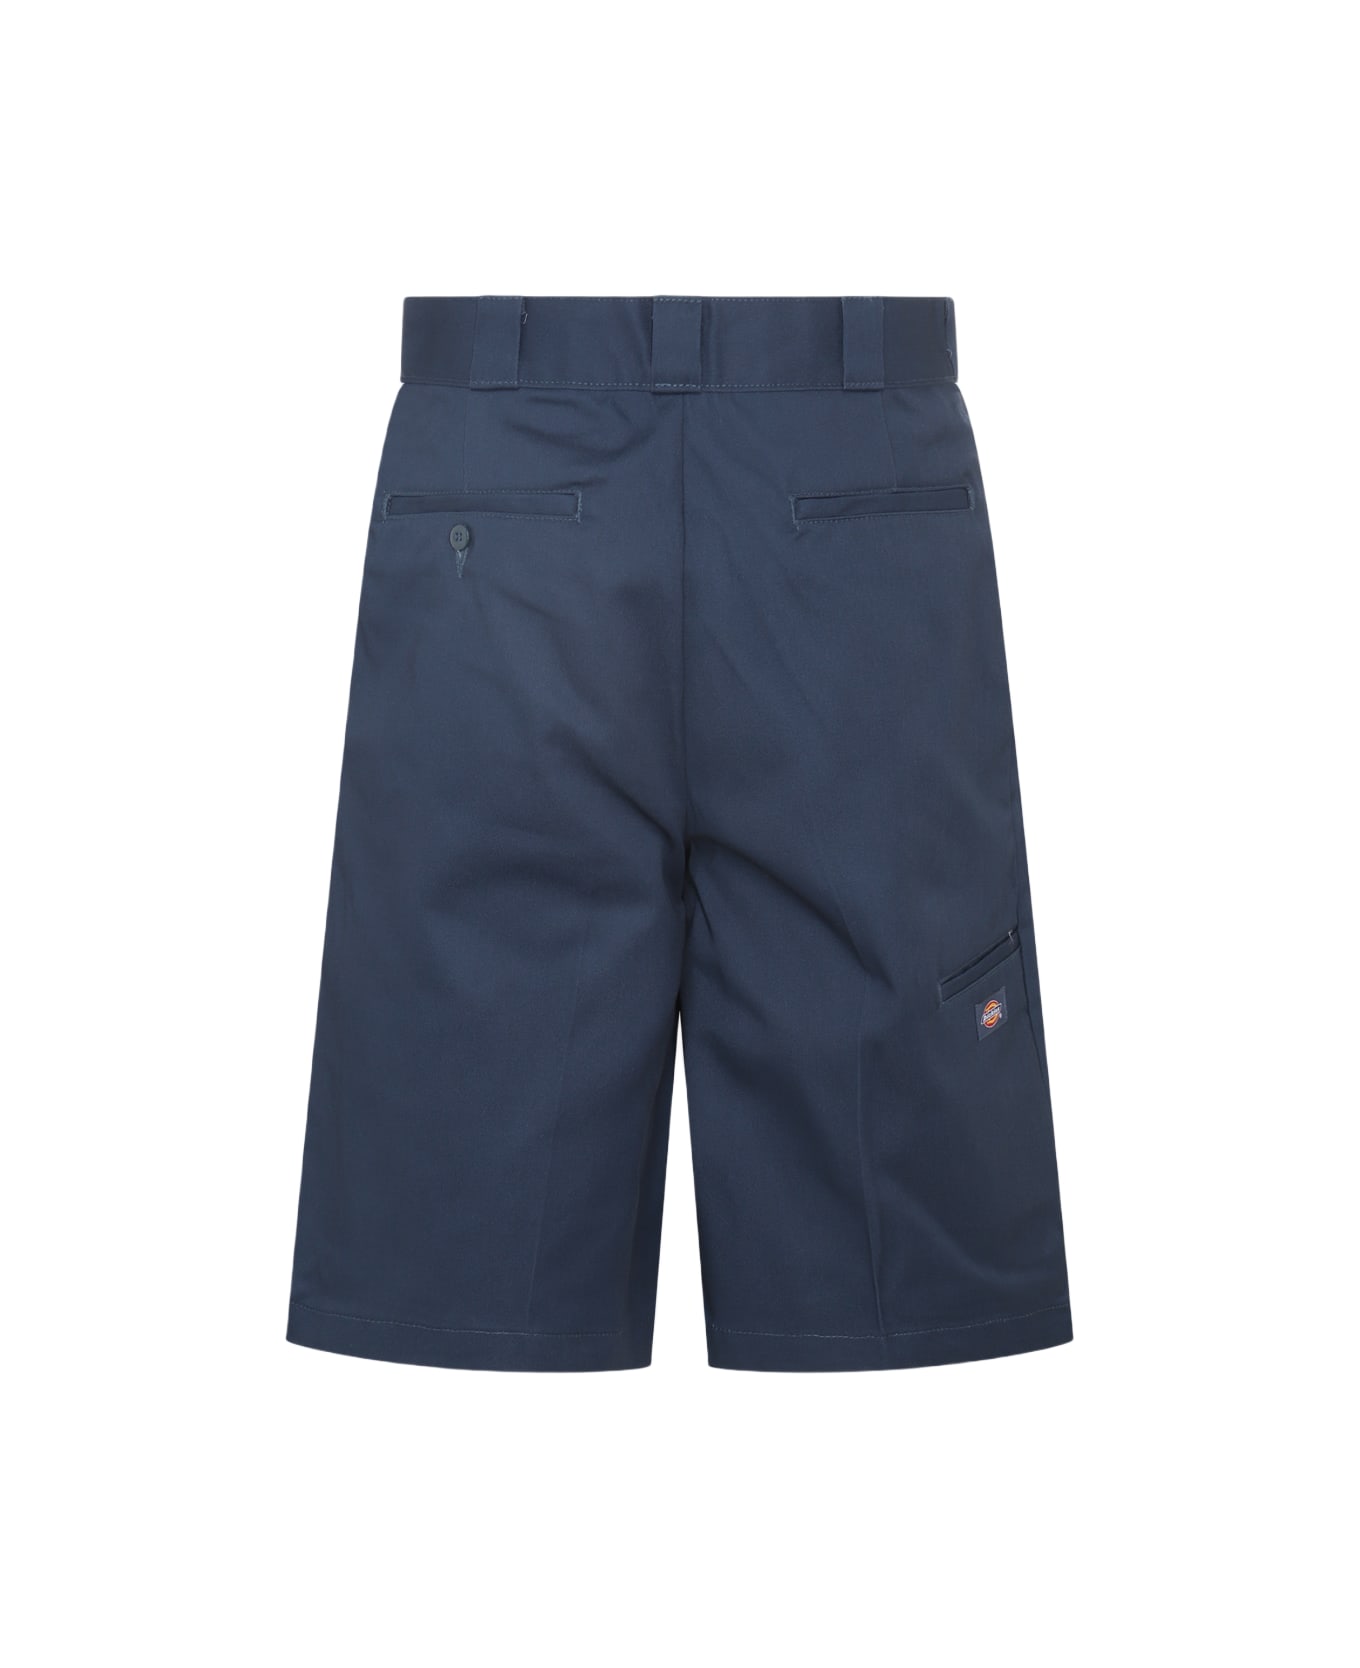 Dickies Air Force Blue Cotton Blend Shorts